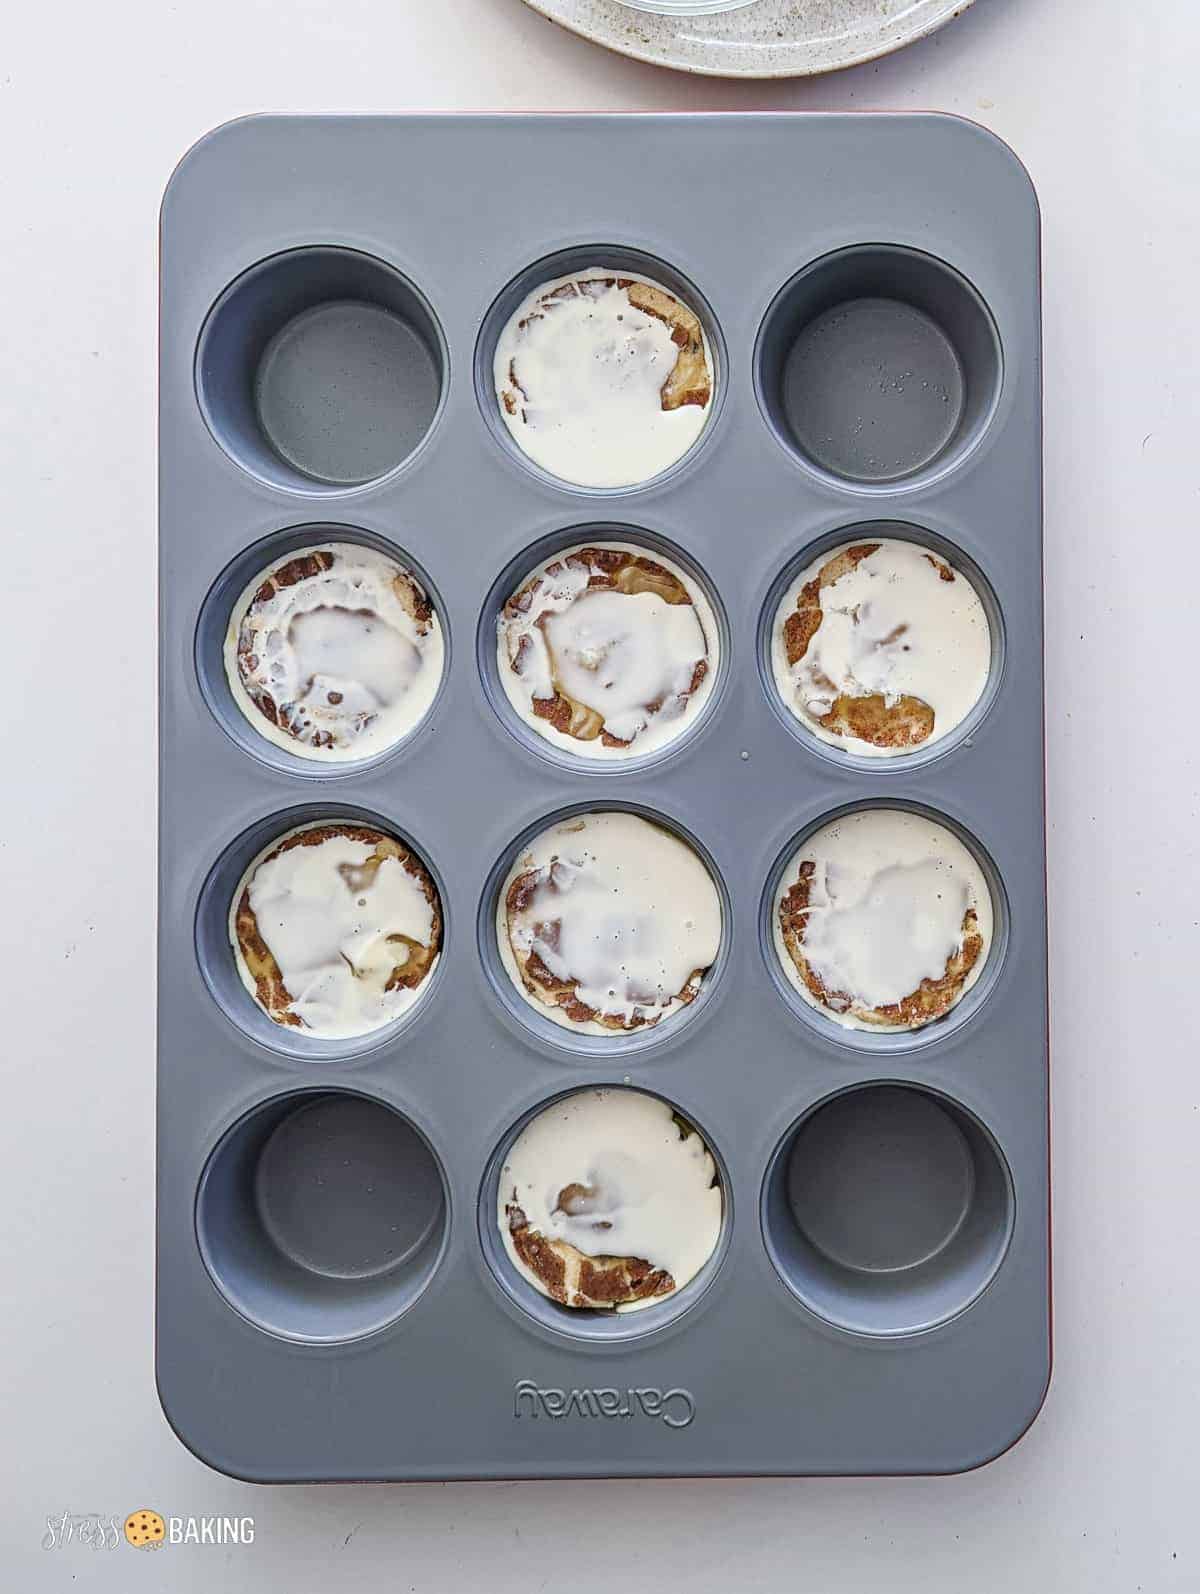 Cinnamon rolls in the muffin cups of a Caraway muffin pan soaked in heavy cream and butter